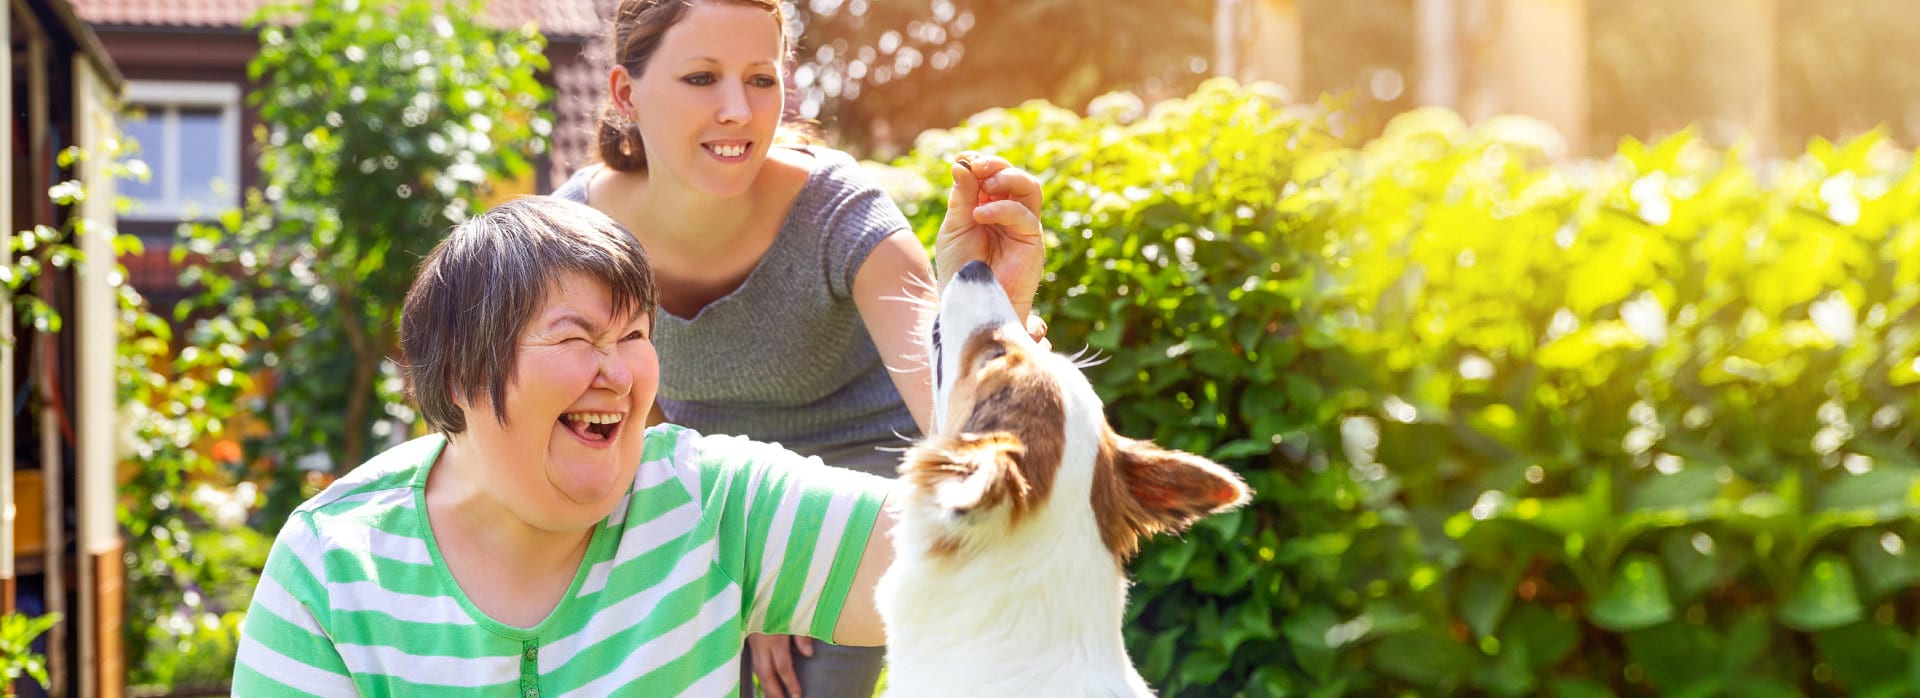 two women are smiling while feeding the dog